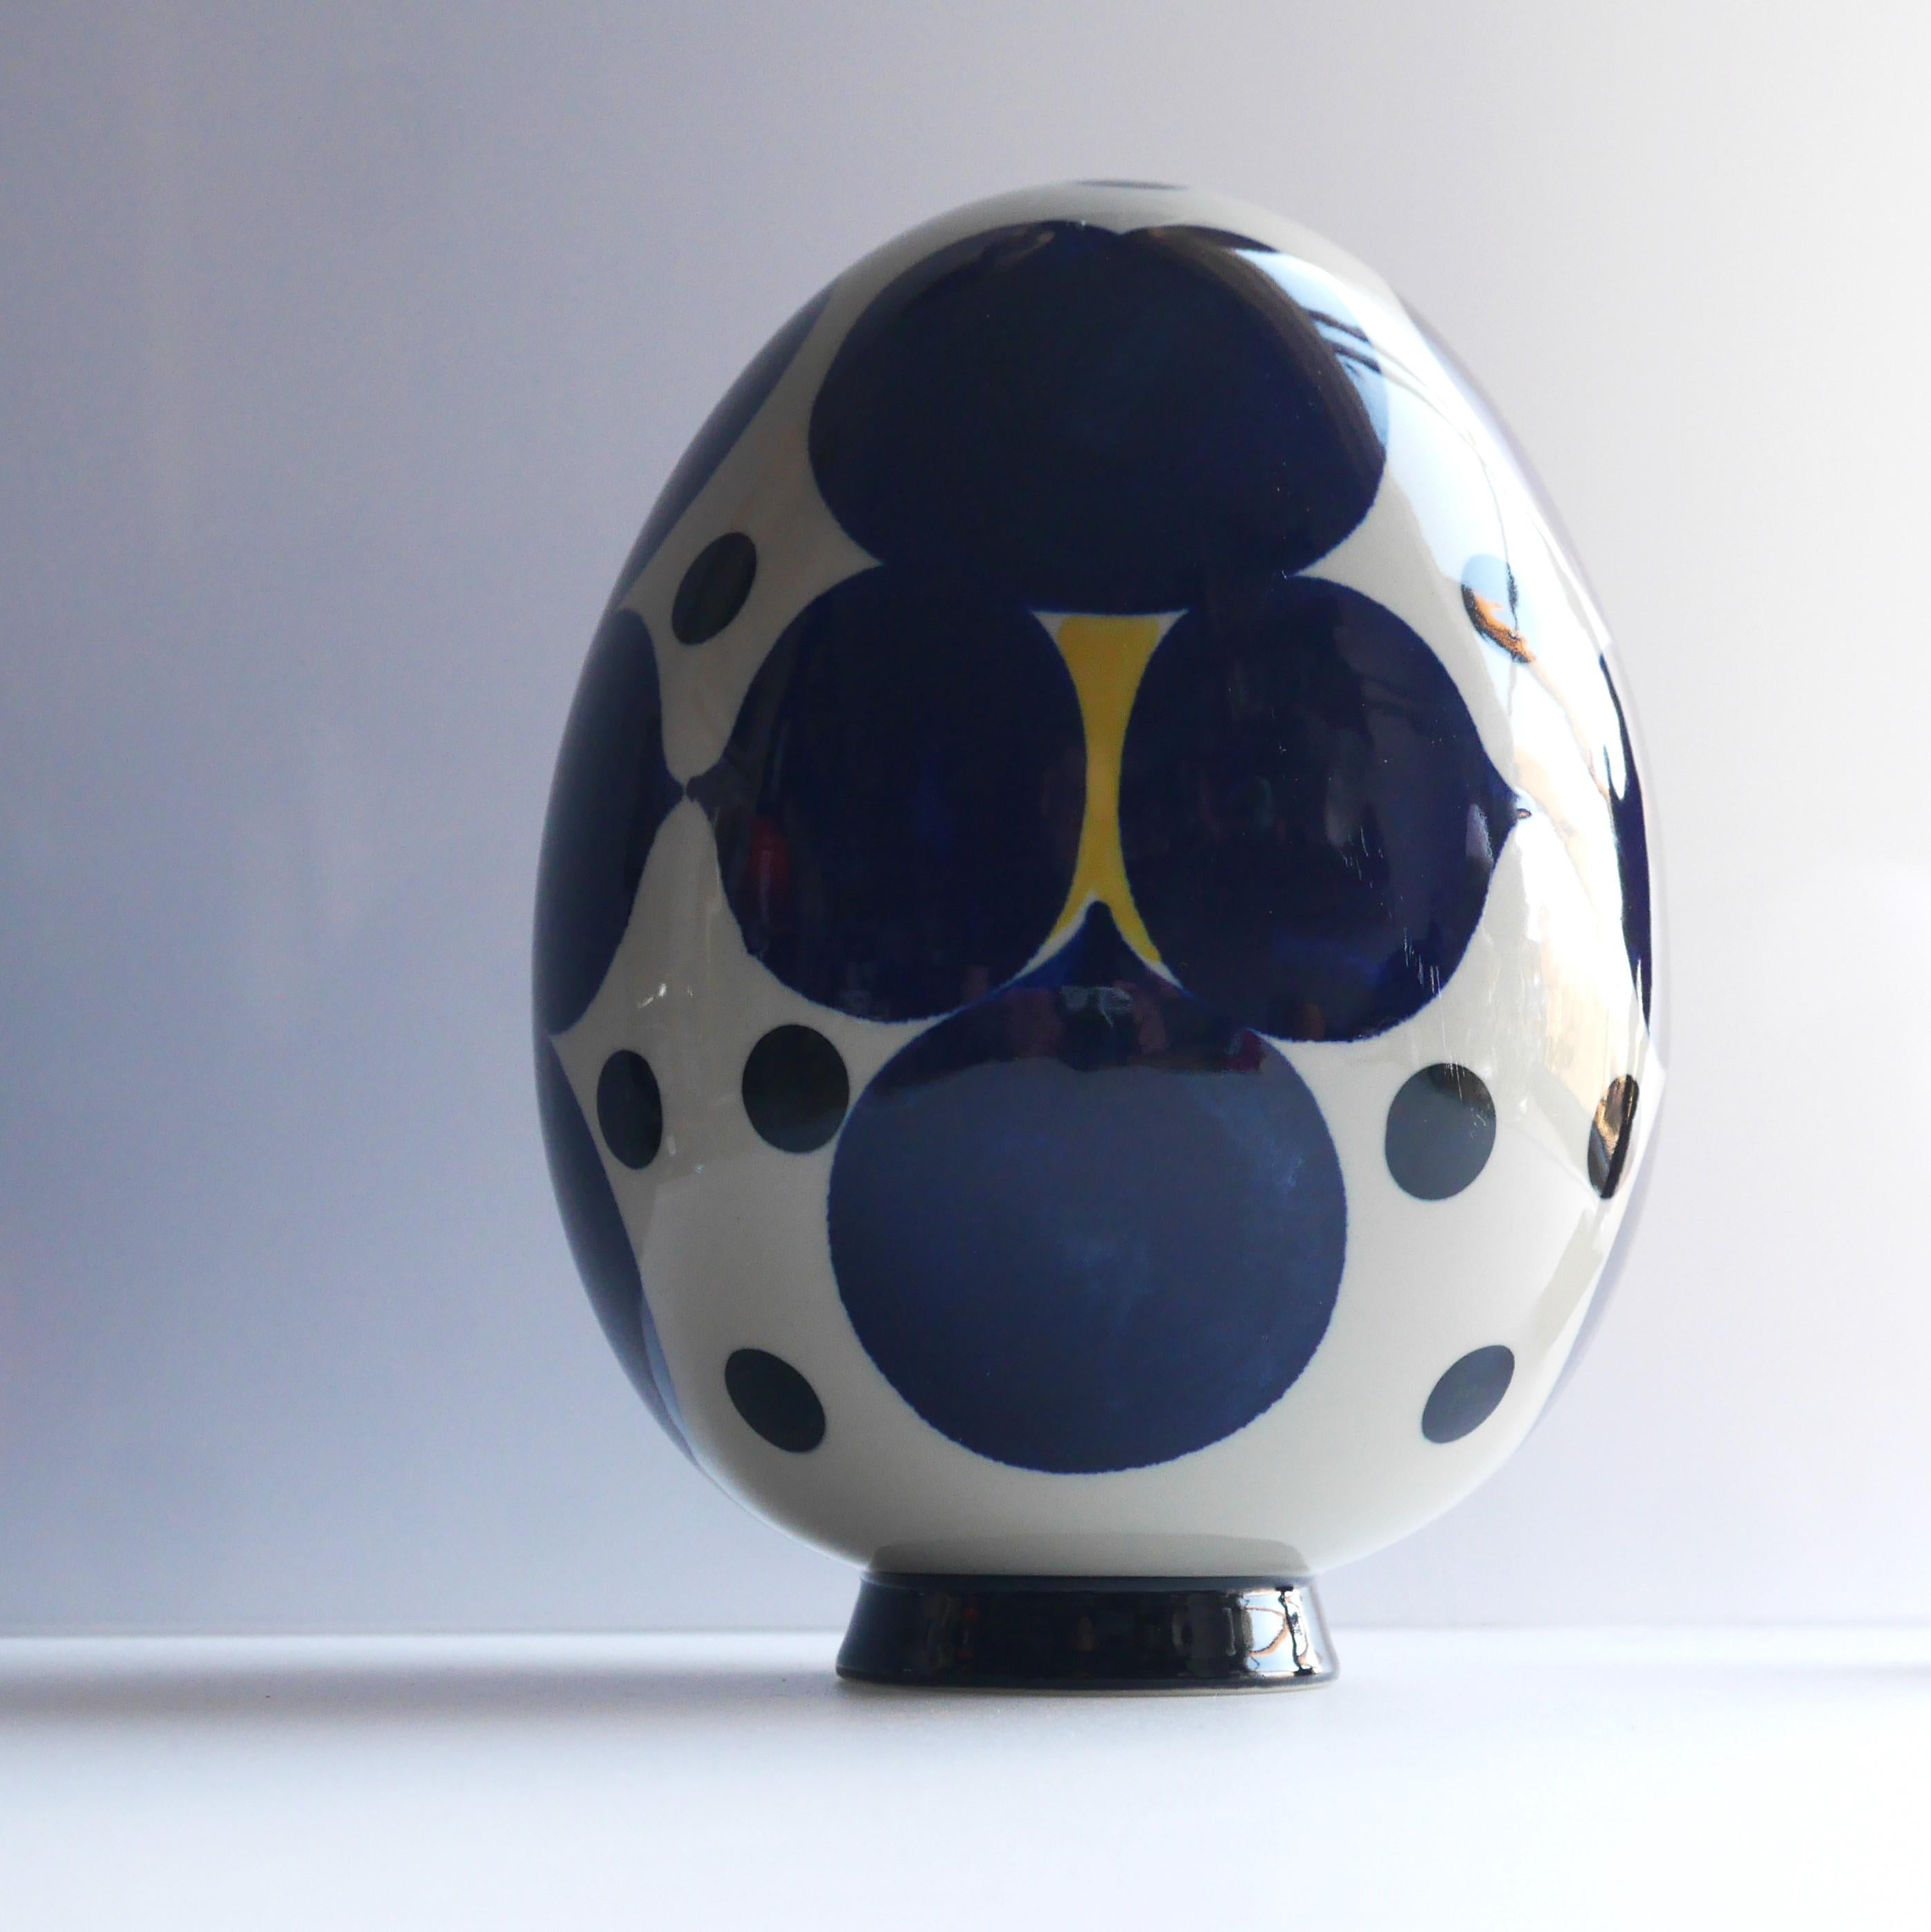 A large unique and stunning vintage porcelain egg made by the talented Sylvia Leuchovius for Rörstrand, Sweden. This a very special item, a studio production and only produced in a very limited number. handmade and painted. The decoration has a